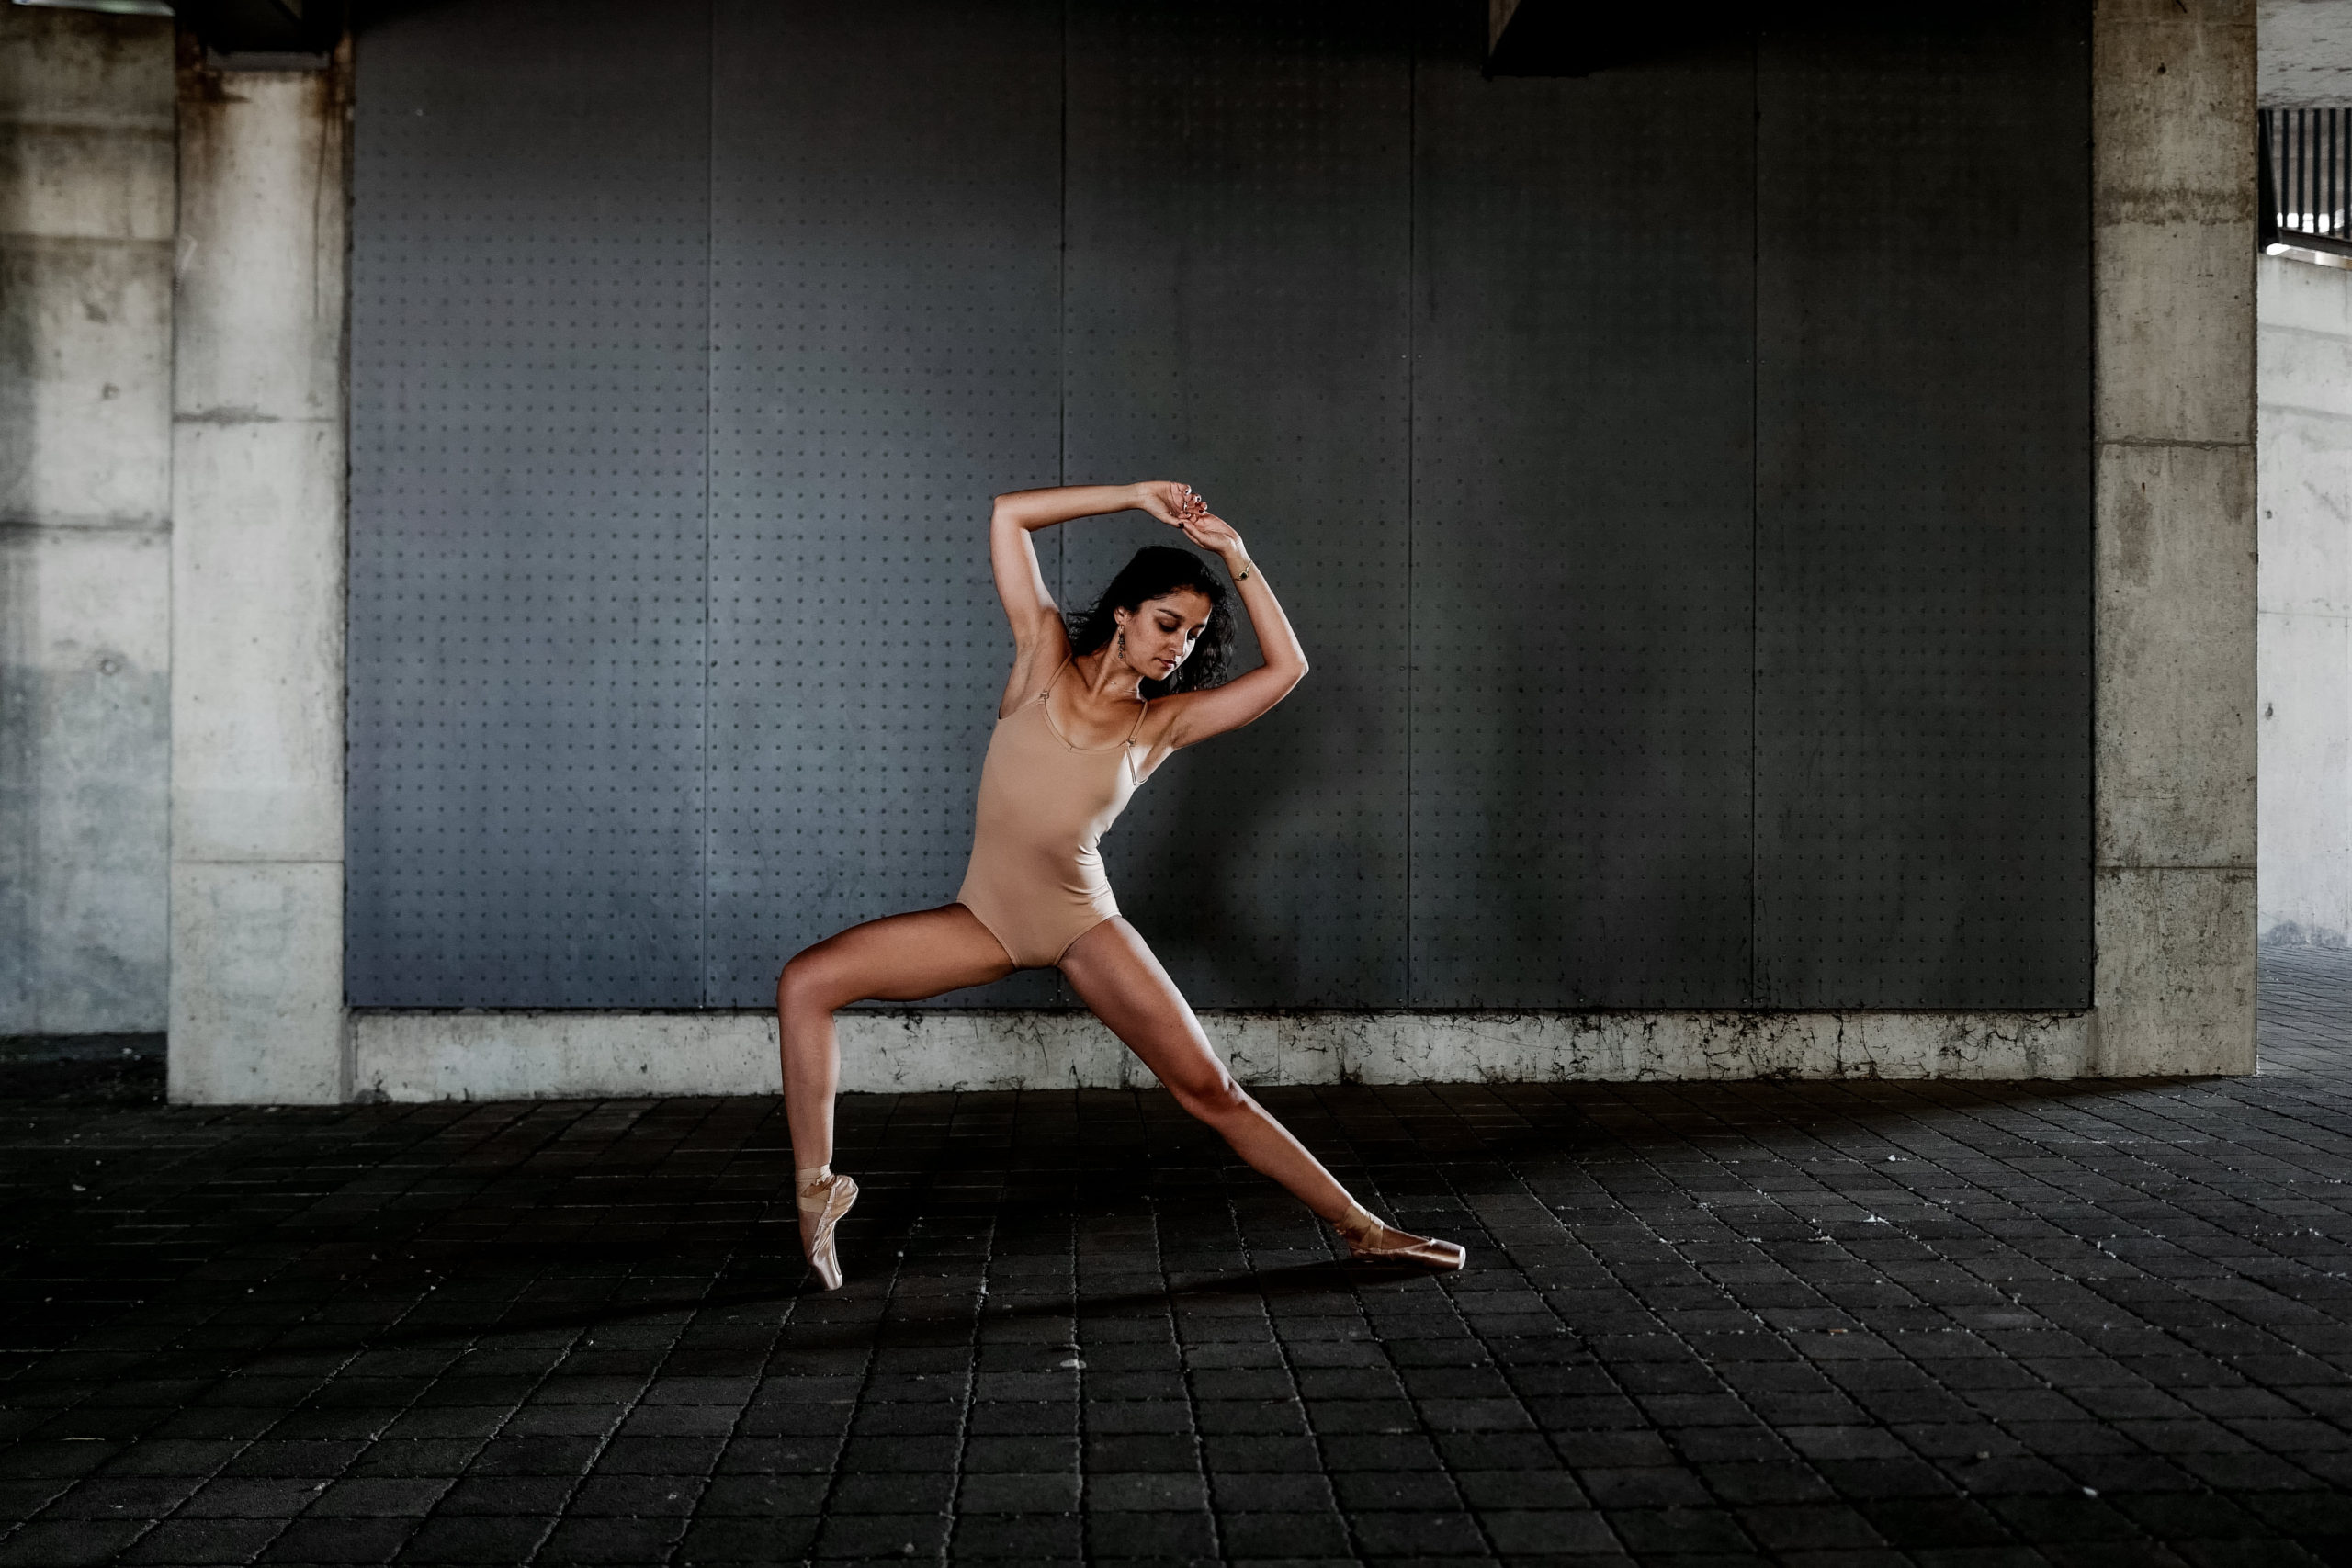 A woman in a nude body suit stretching